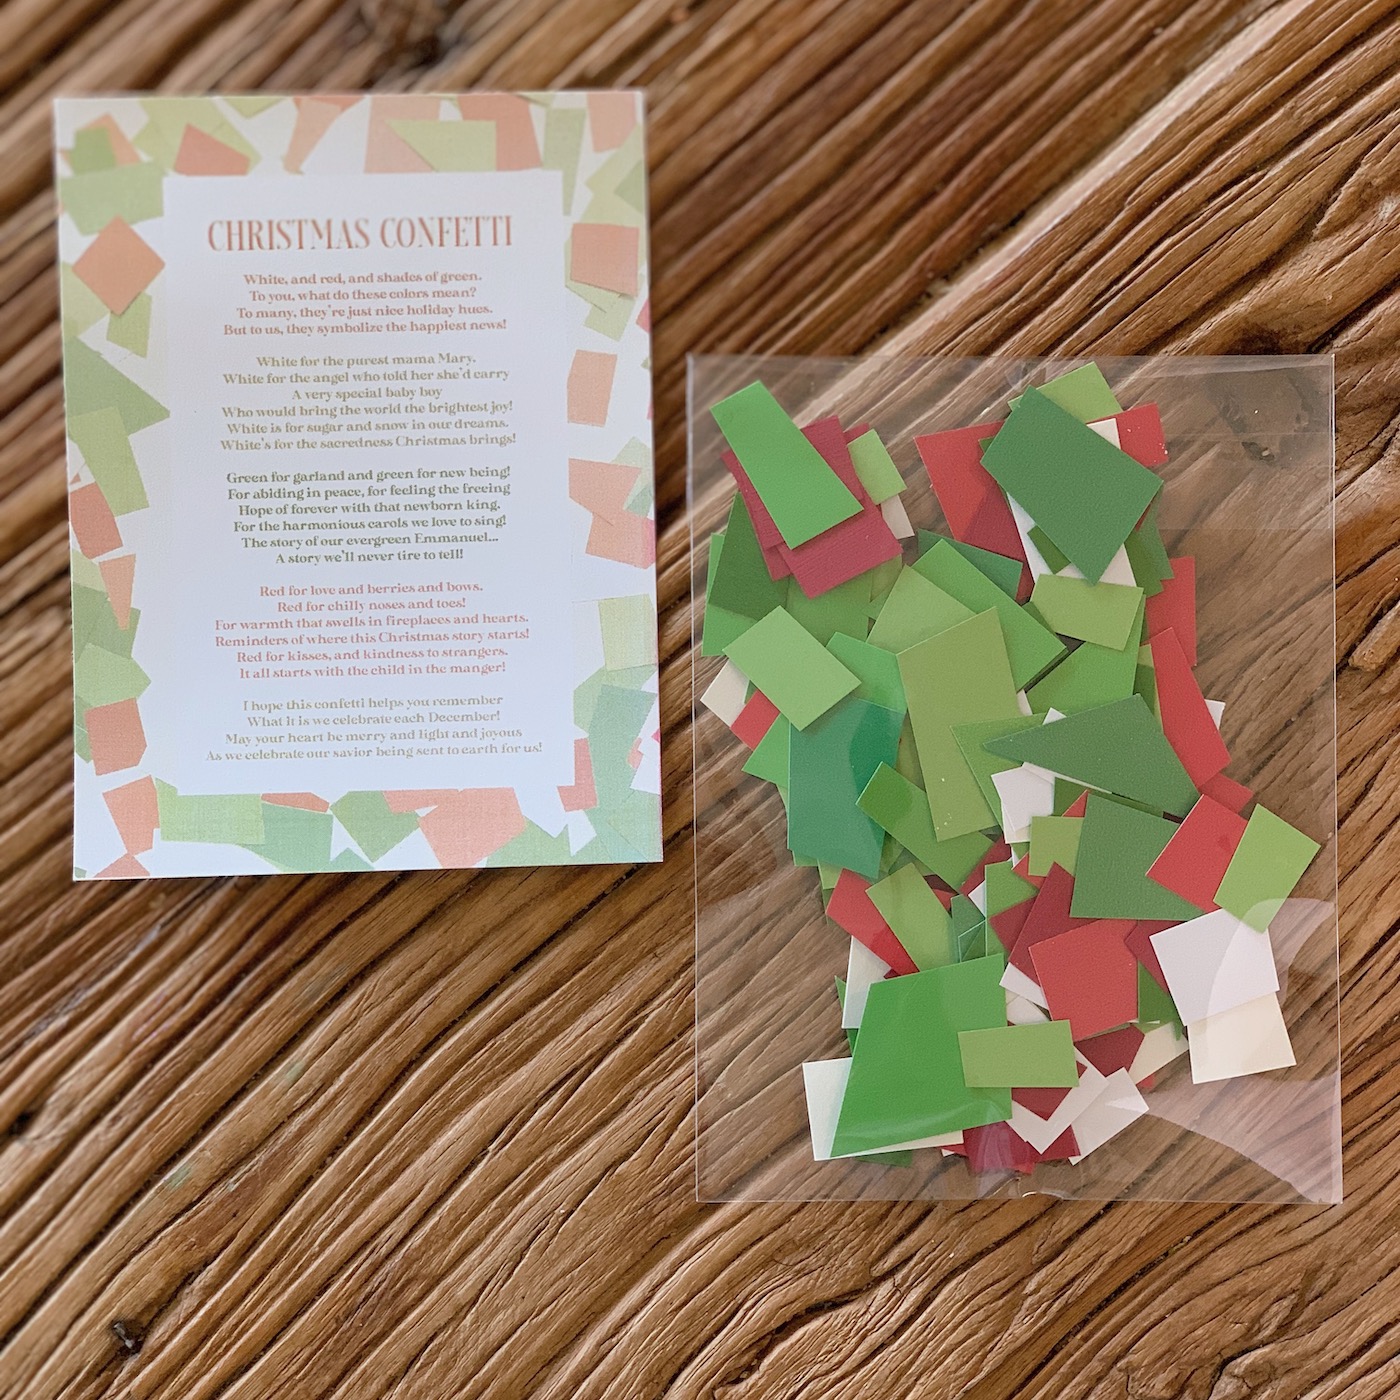 CHRISTMAS CONFETTI - a poem that keeps the focus on JESUS while also helping create some magic and whimsy! Get your printable now! 